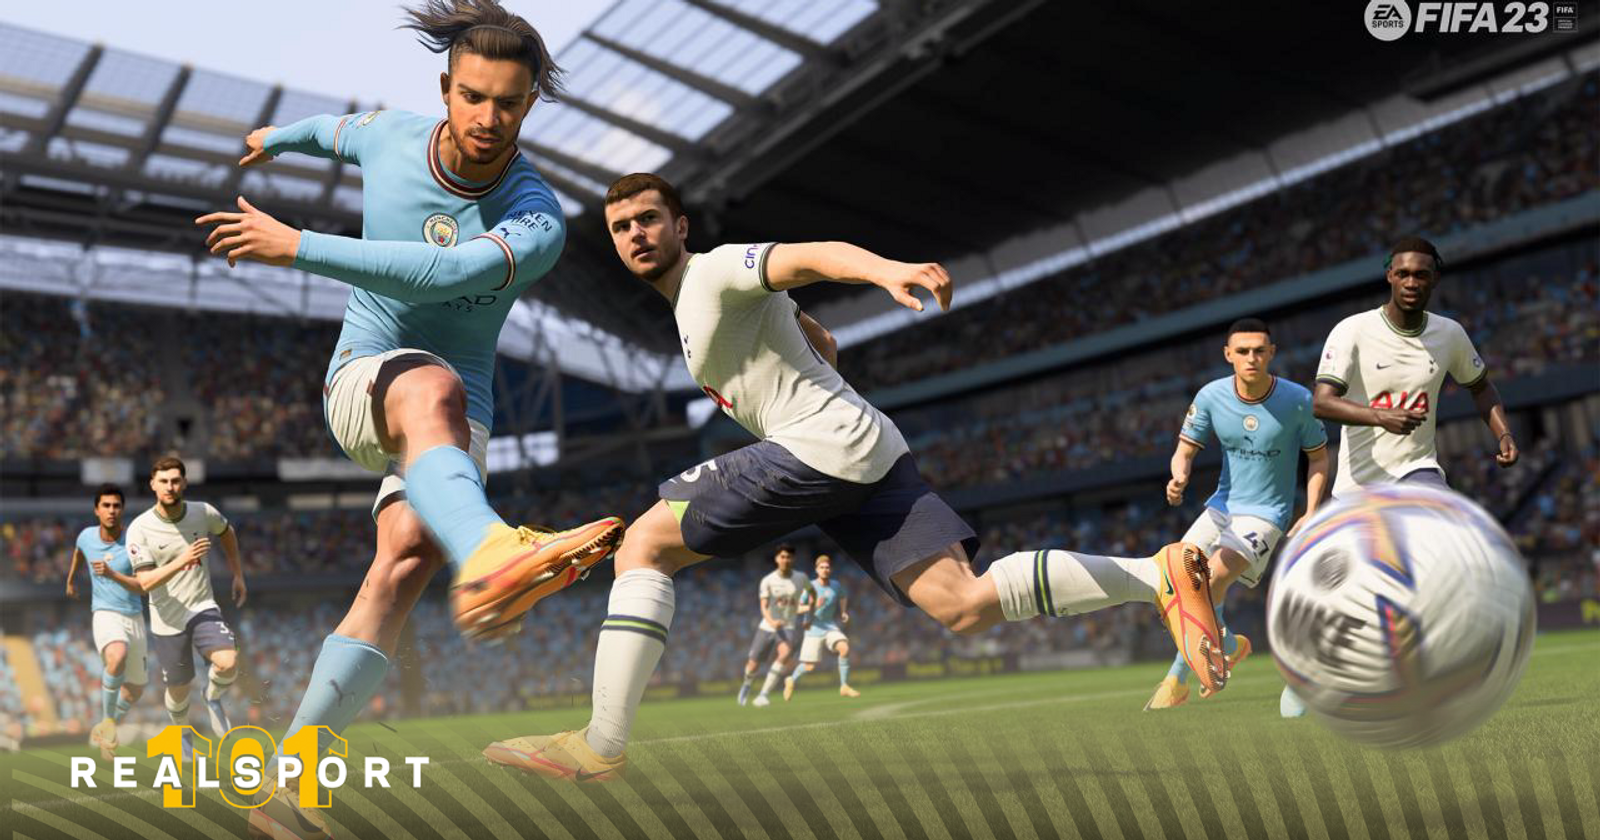 Unlock exclusive content with FIFA 23 Prime Gaming Pack 10